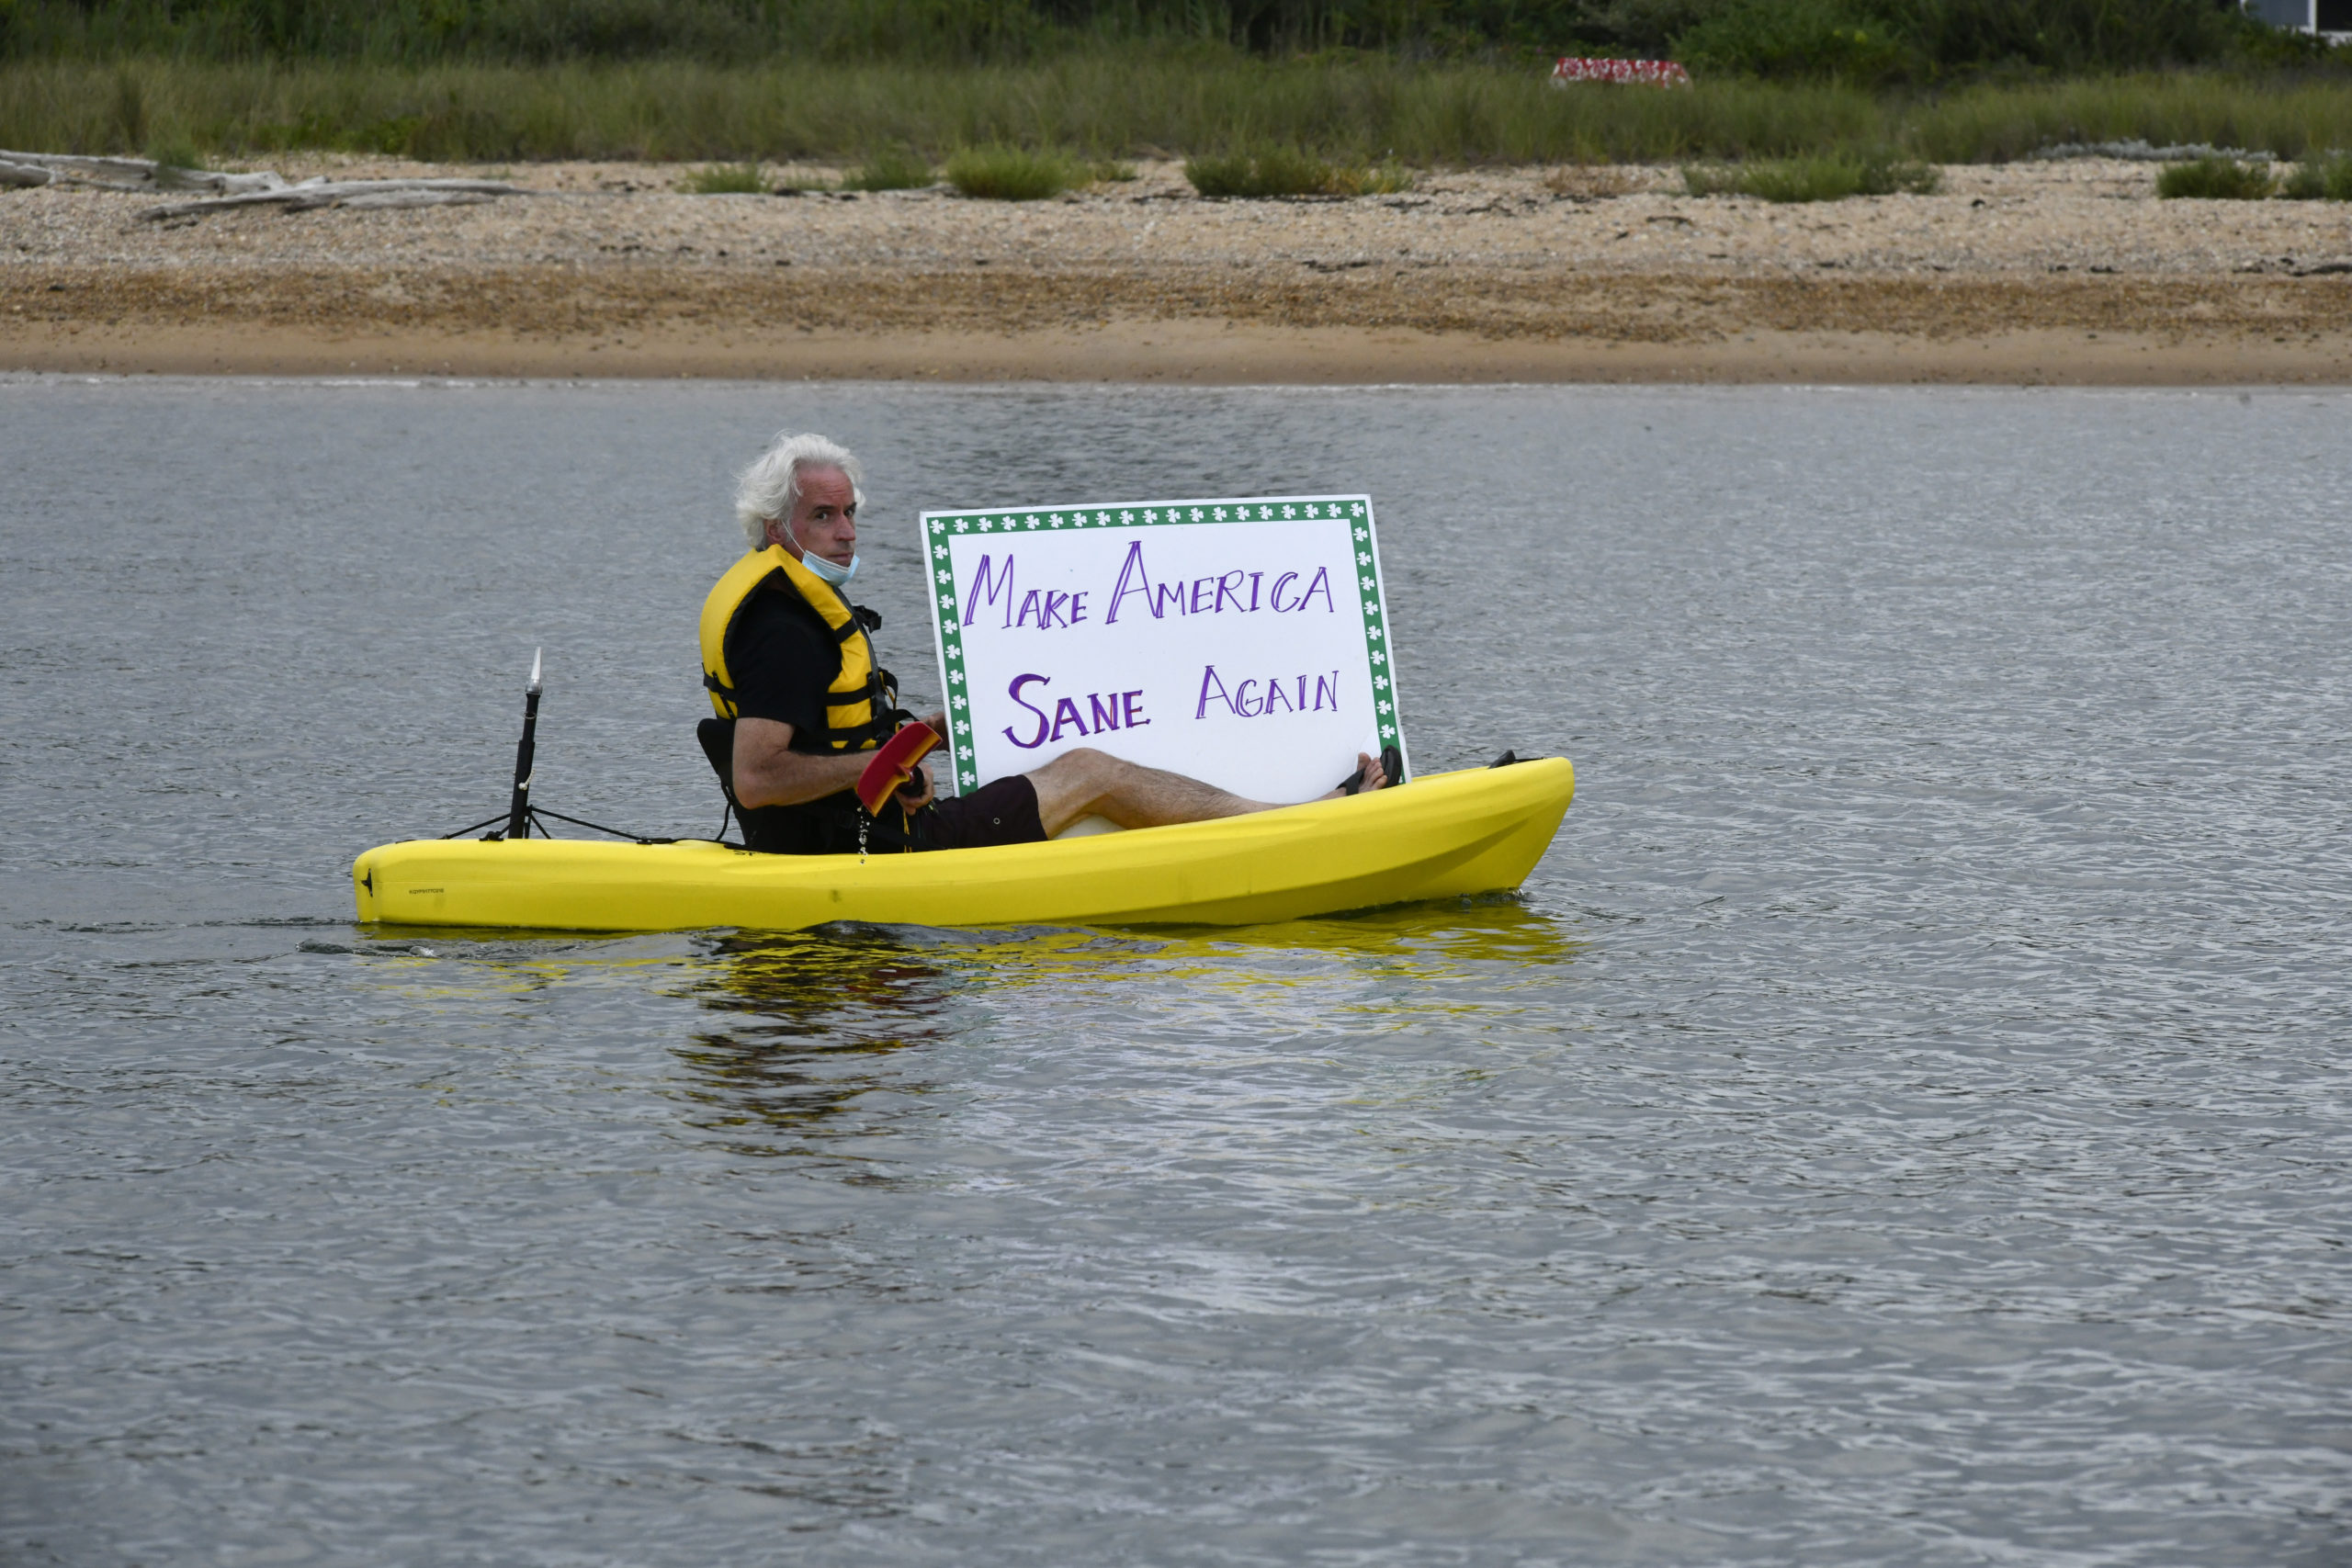 Kayaker Thomas Byrne shows his support for presidential candidate Joe Biden at 